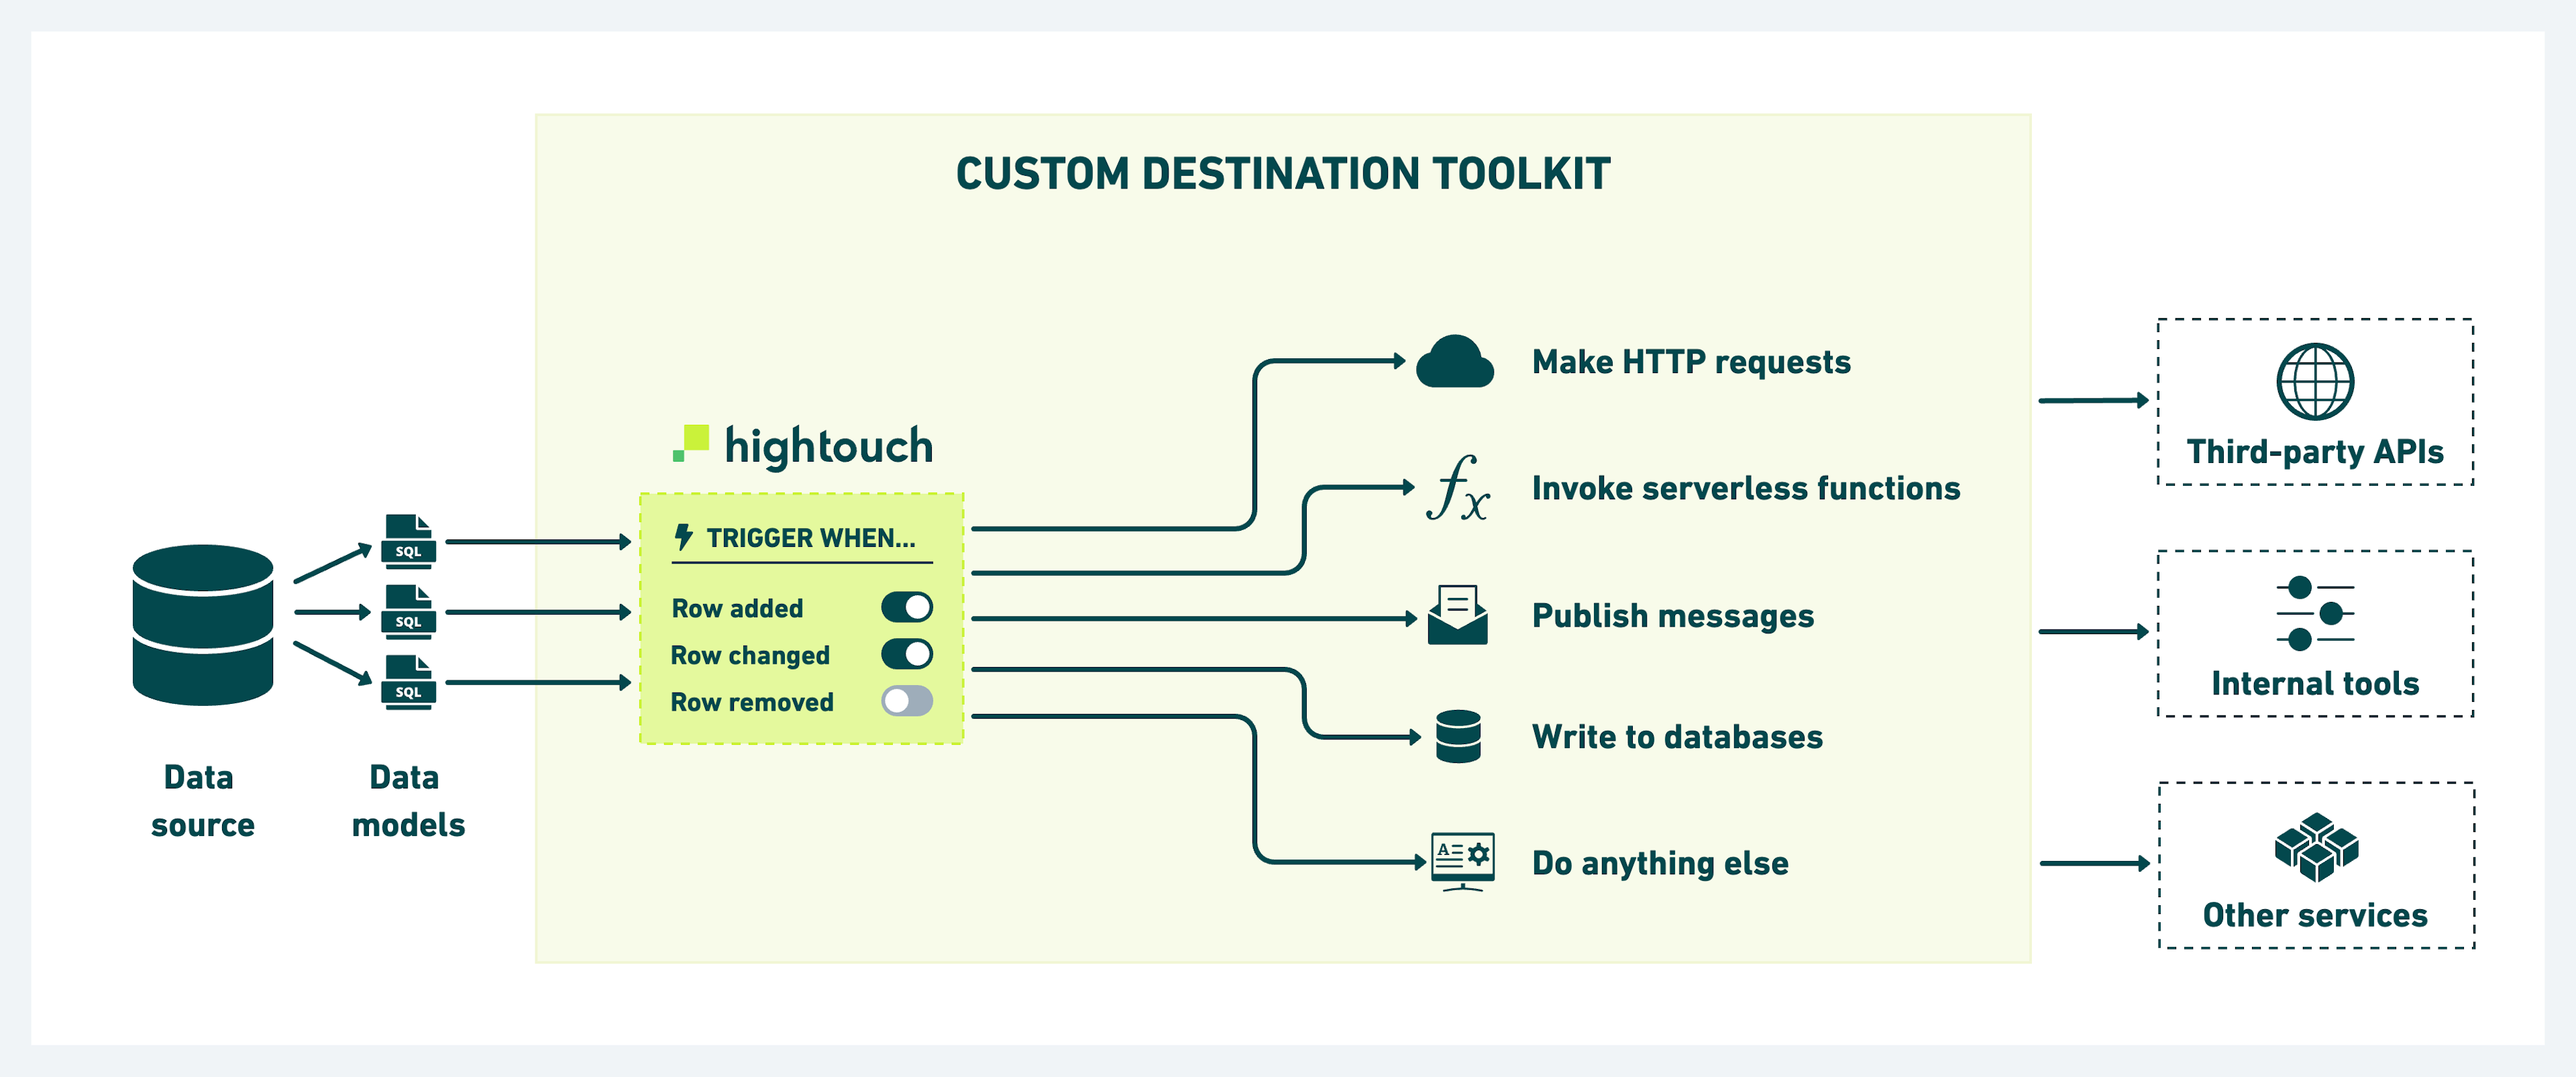 custom-destination-toolkit-overview.png